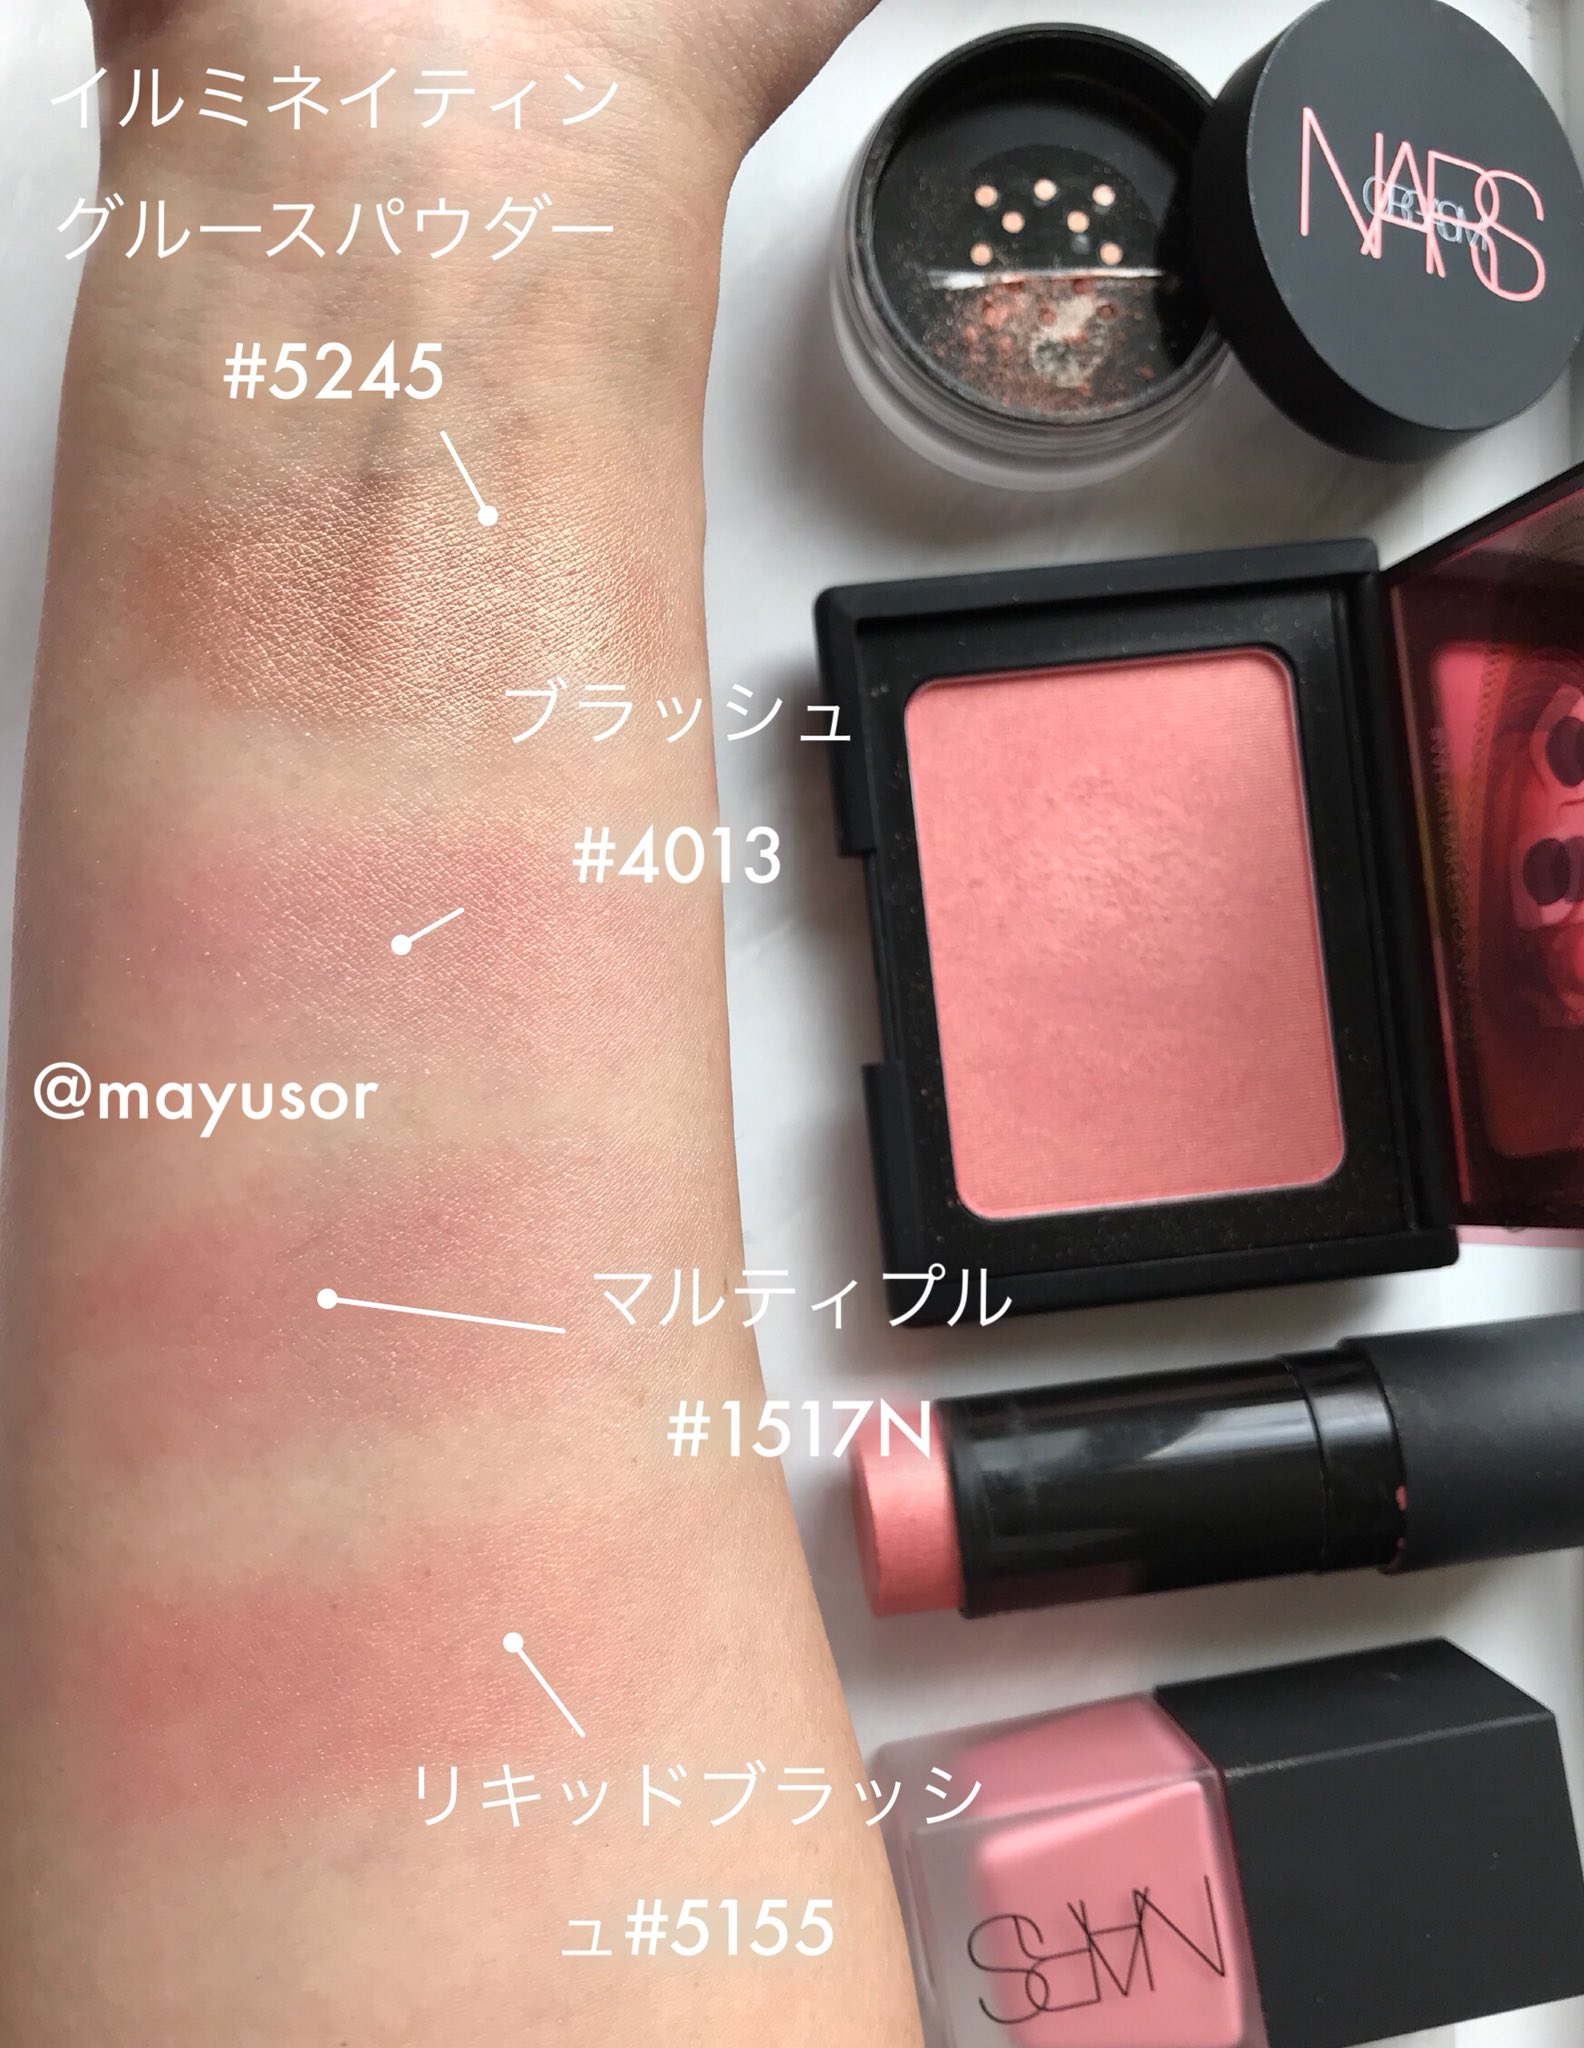 NARS リキッドブラッシュ 5155 - メイクアップ